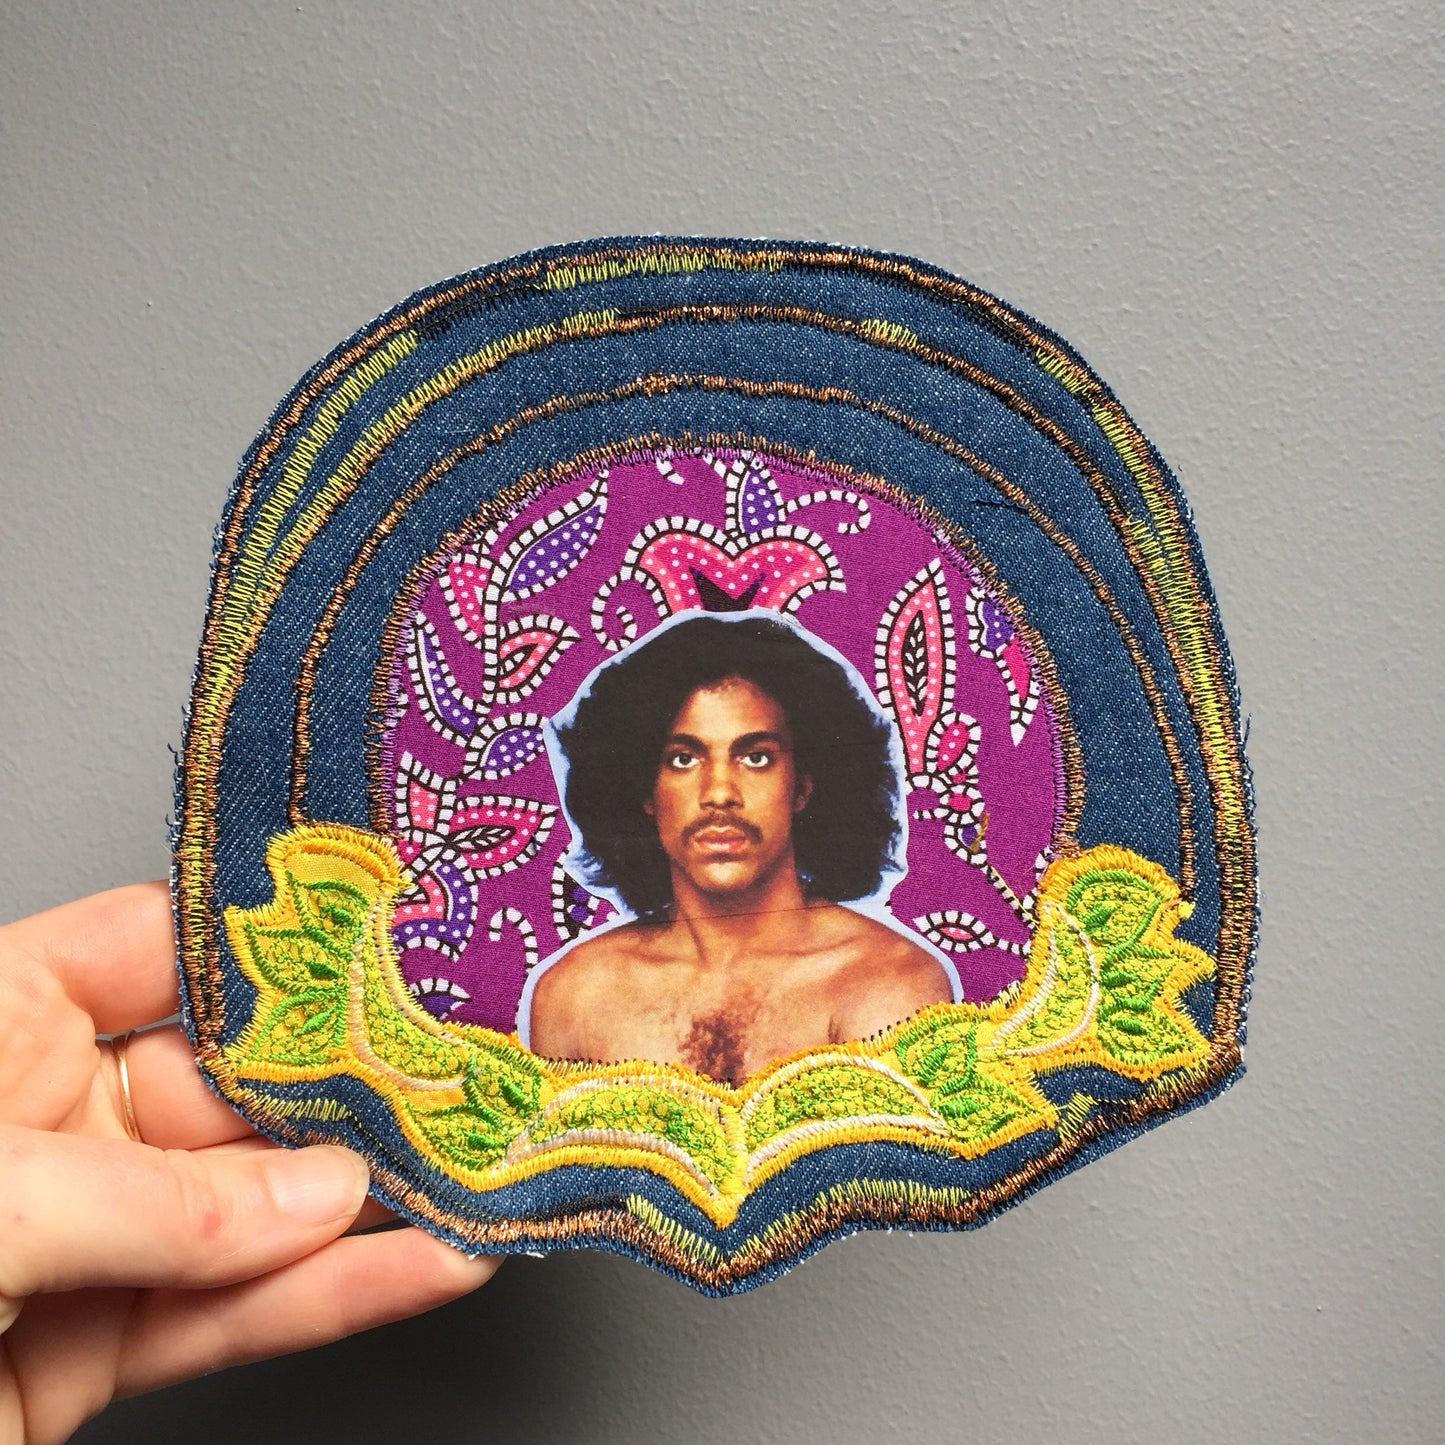 Prince. Handmade Jean Jacket Patch. Vintage Denim and Embroidery